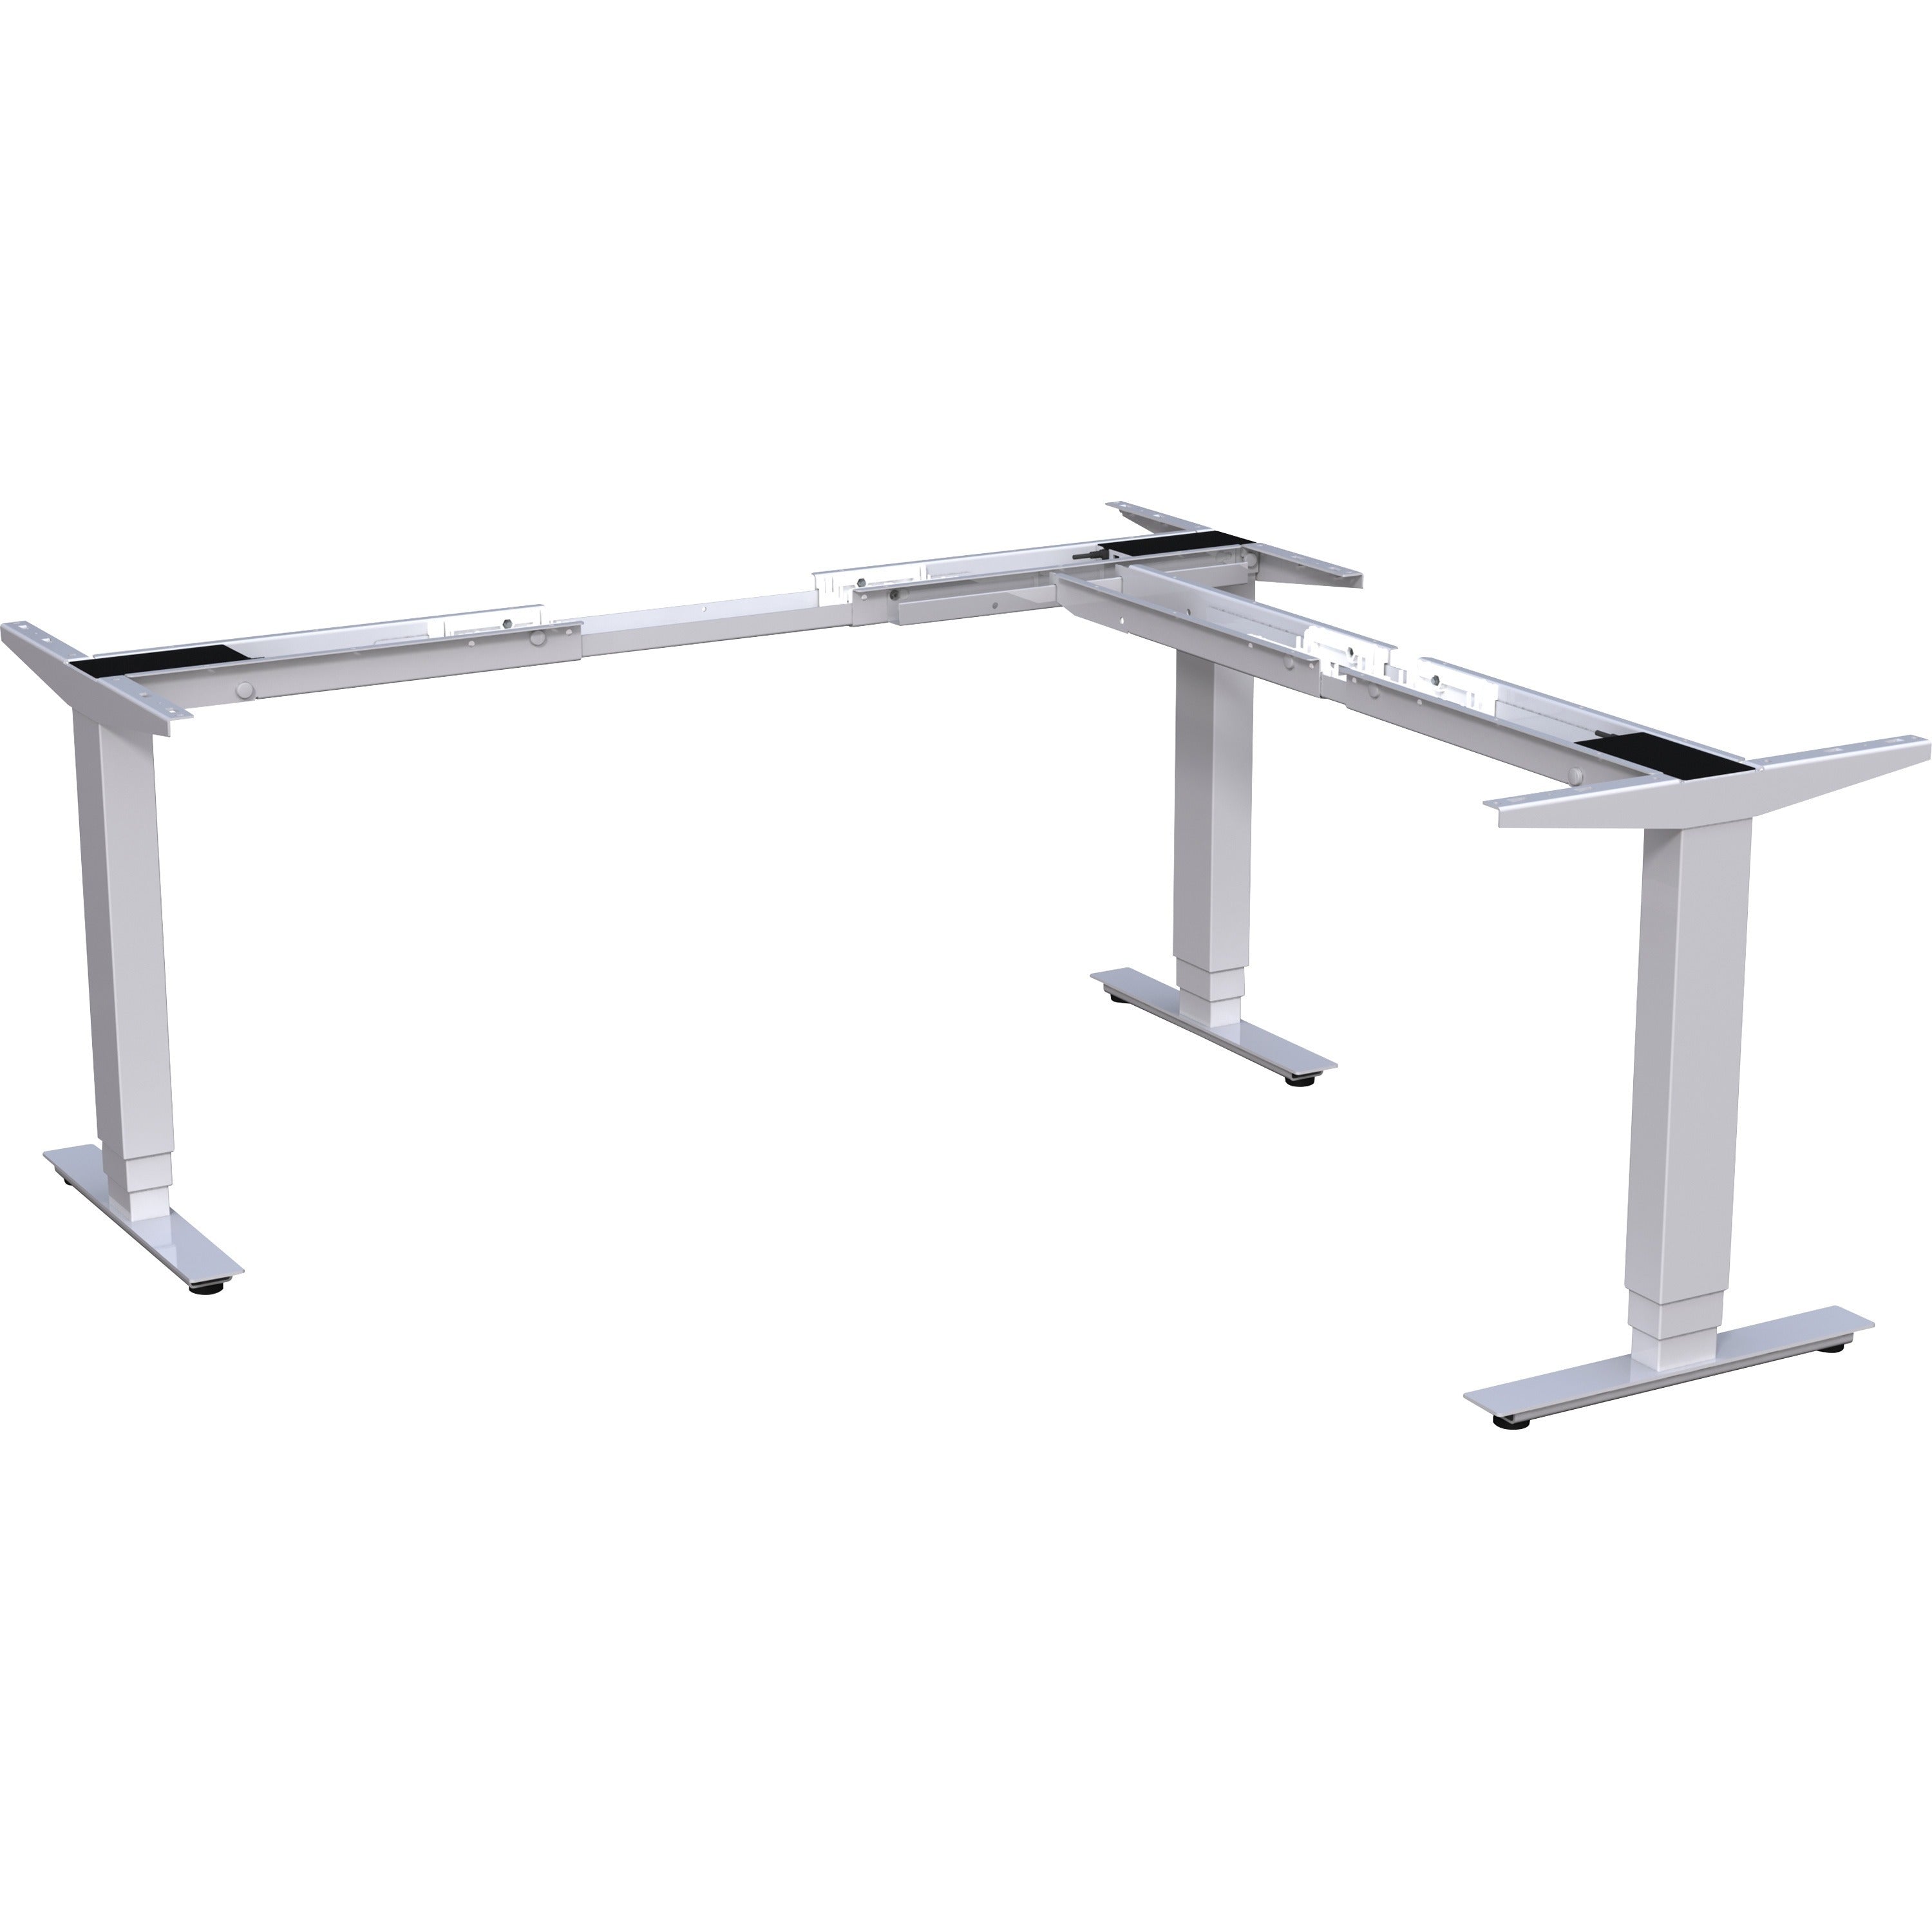 lorell-quadro-workstation-sit-to-stand-3-leg-base-silver-three-leg-base-3-legs-24-to-50-adjustment-50-height-assembly-required-1-each_llr25949 - 1